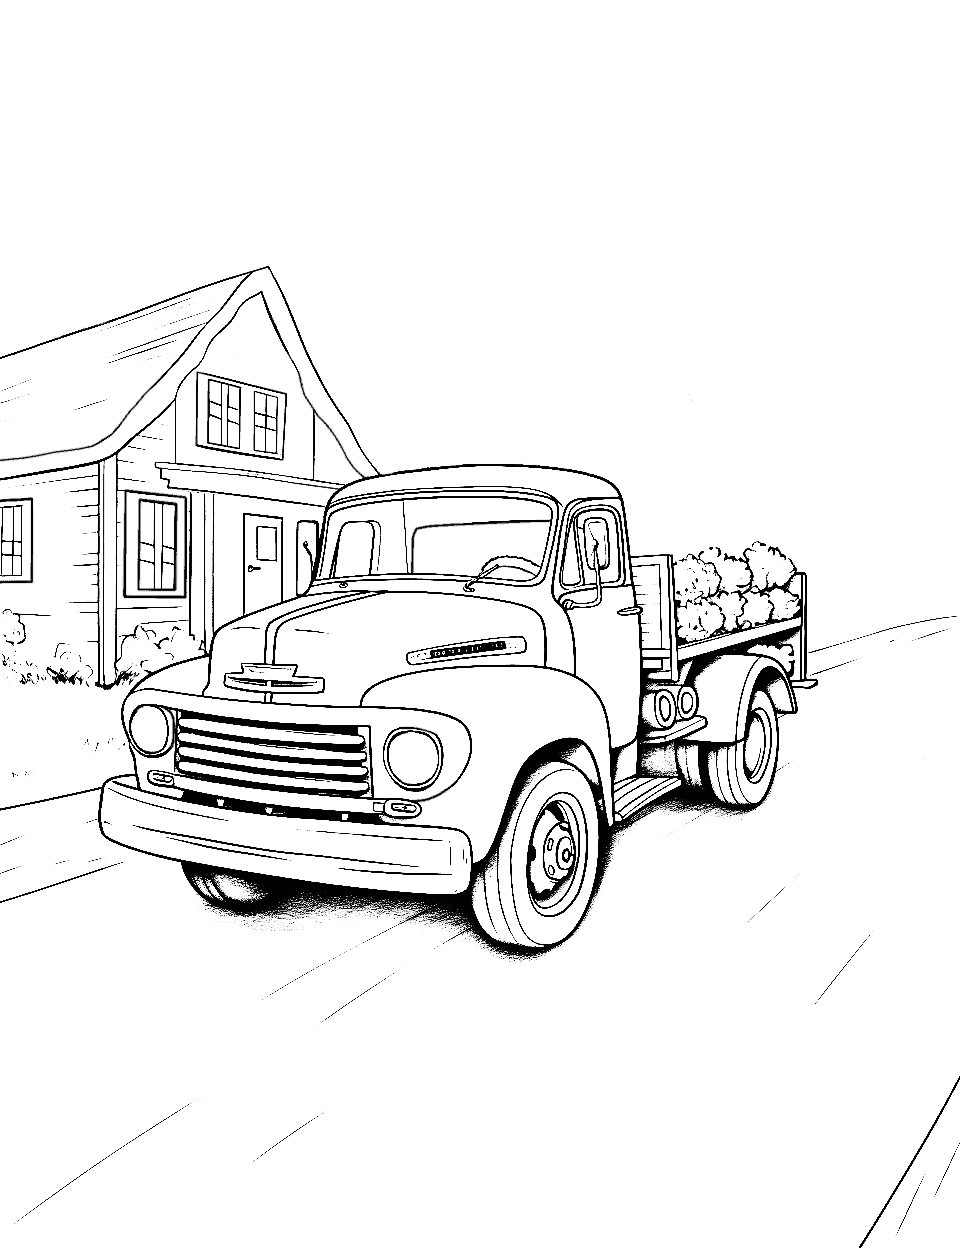 Birthday Truck Coloring Page - A truck carrying flowers on its way to a birthday party.